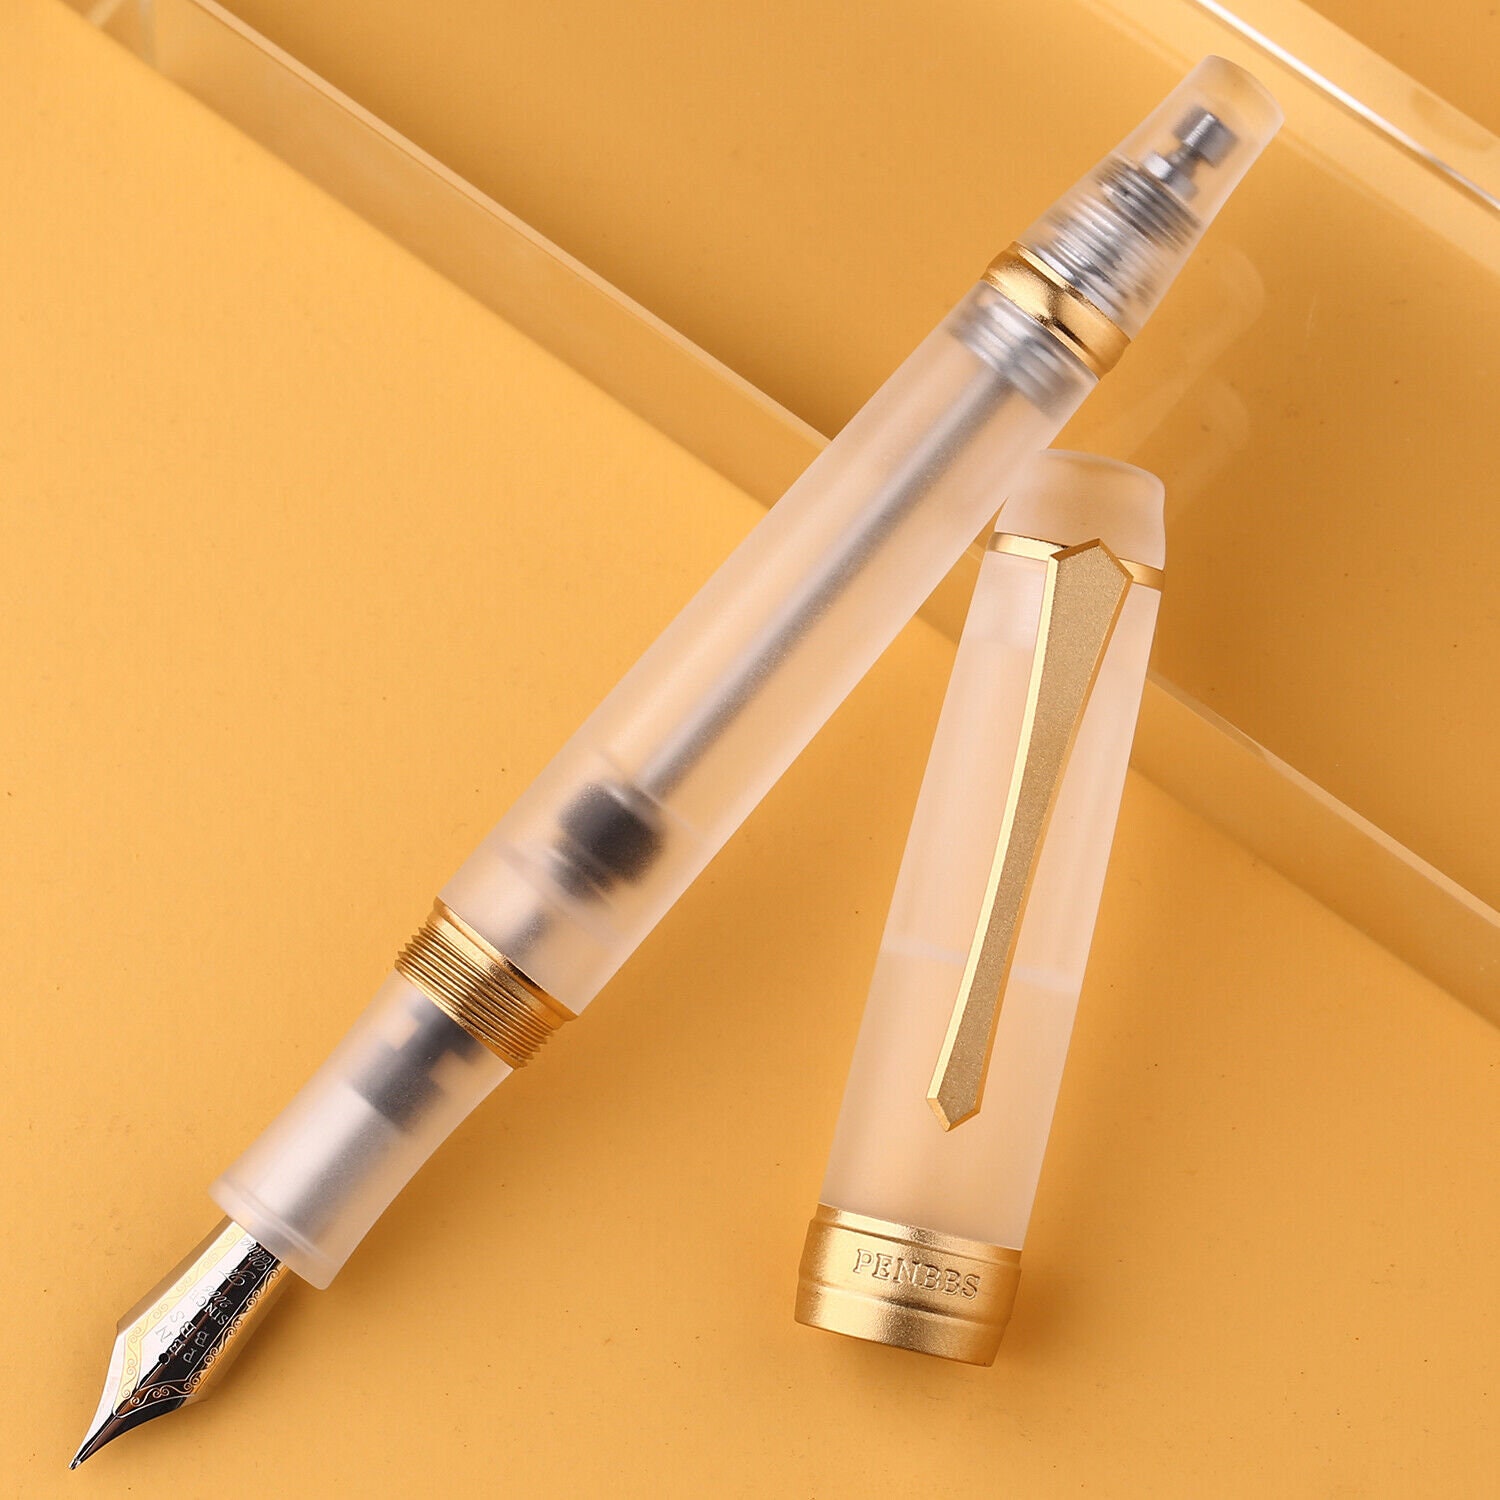 Wingsung 322 Model:16360 Dark Grey Color Lines And Dot Design Body With  Gold Clip Fountain Pen